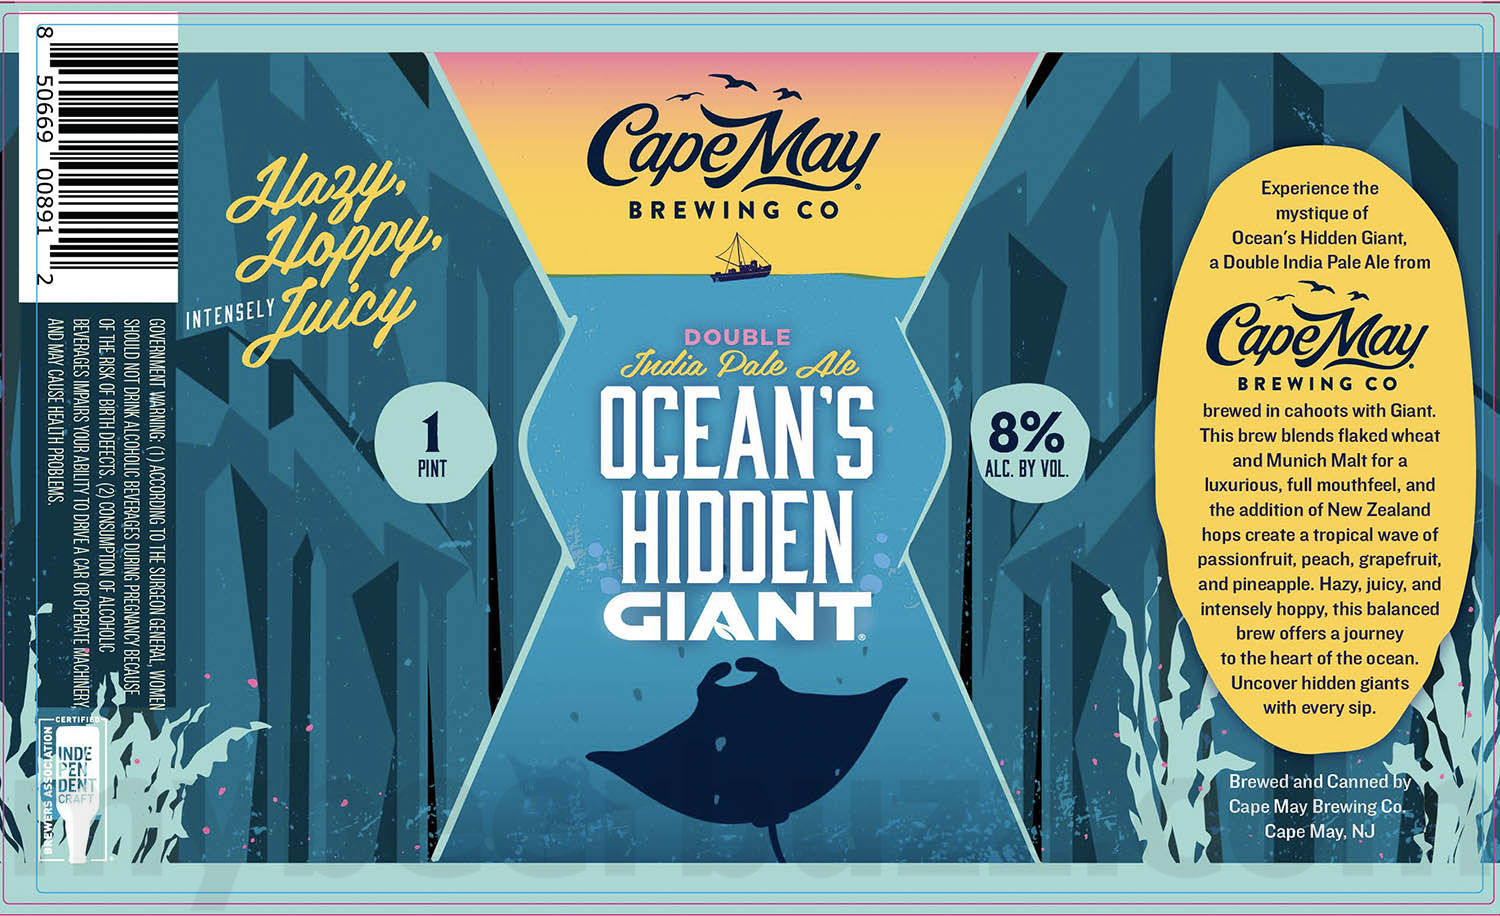 Cape May & Giant Markets Collaborate On Ocean’s Hidden Giant